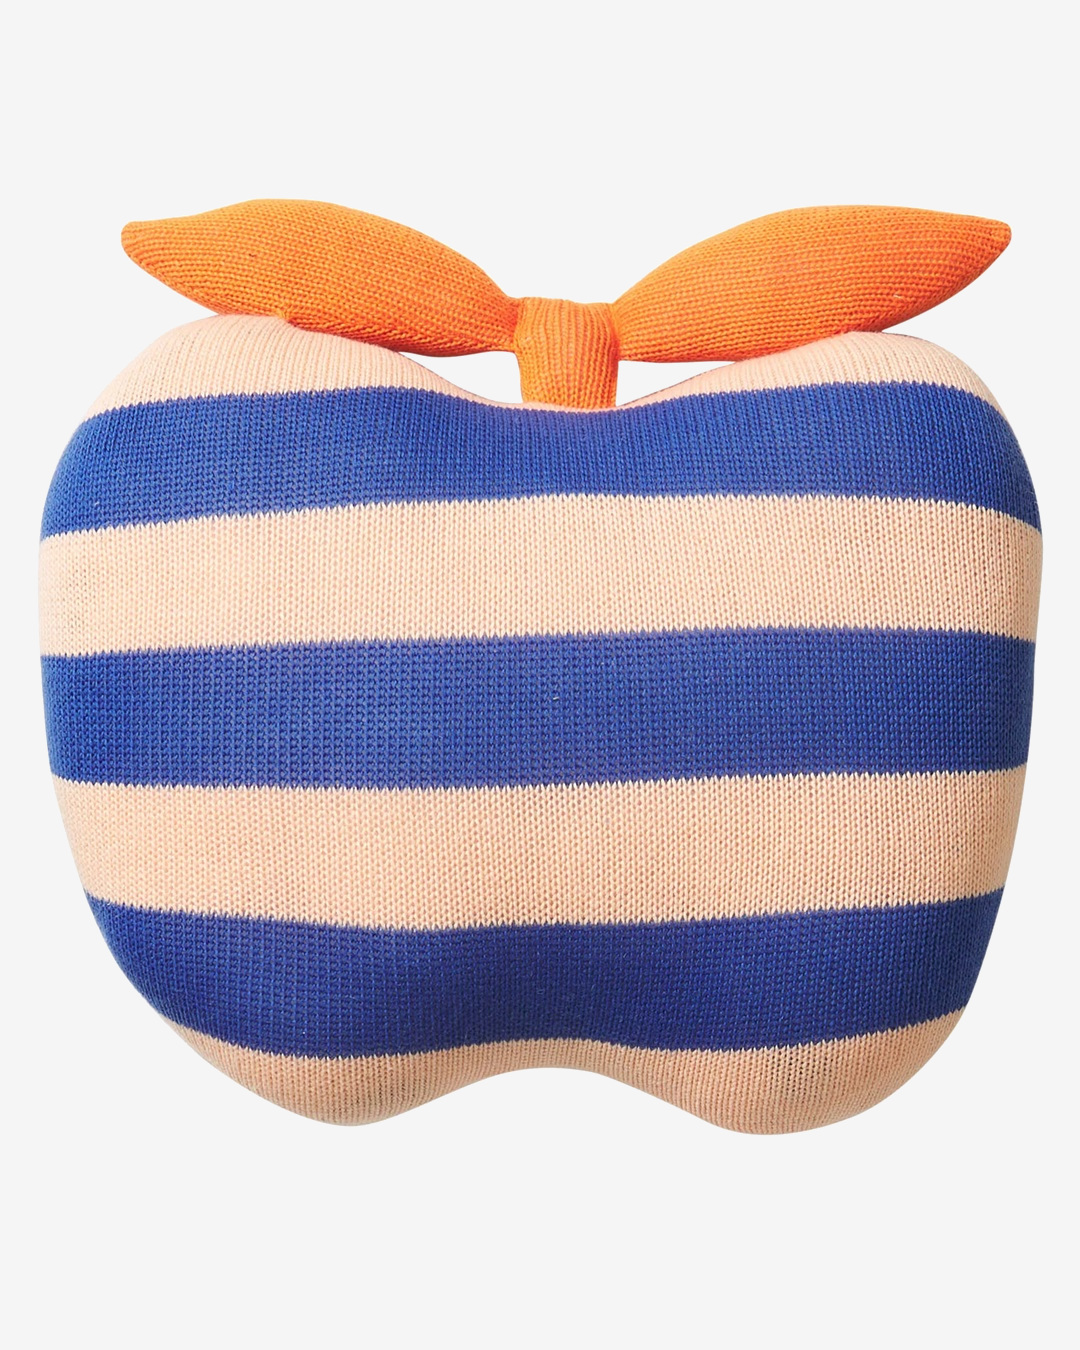 White and blue stripe apple cushion with orange leaves